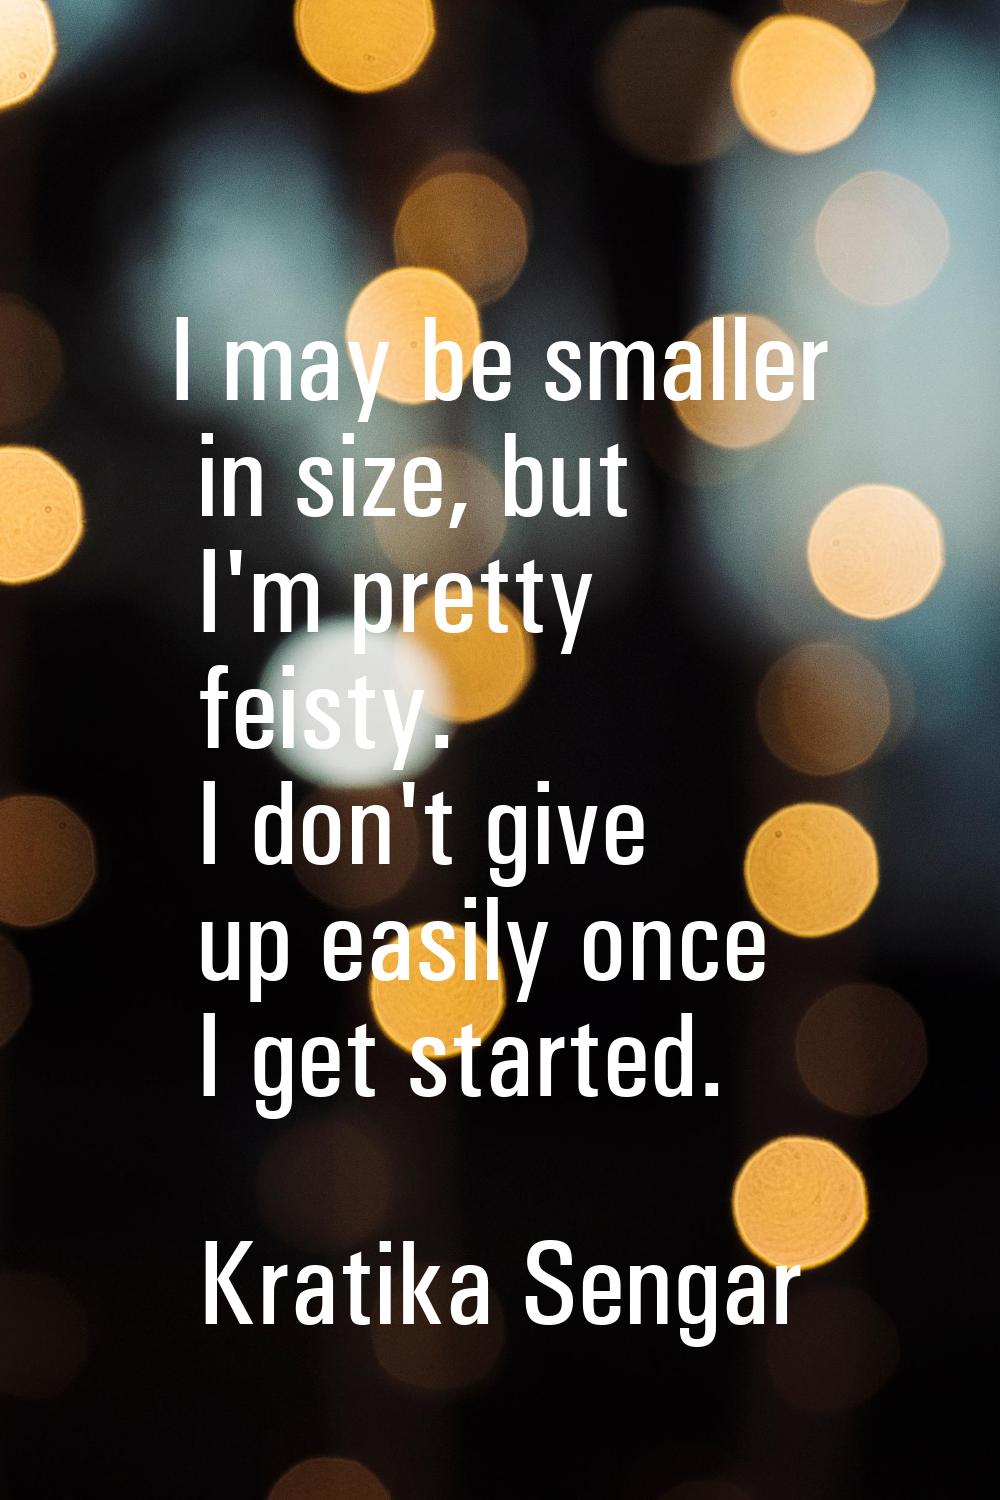 I may be smaller in size, but I'm pretty feisty. I don't give up easily once I get started.